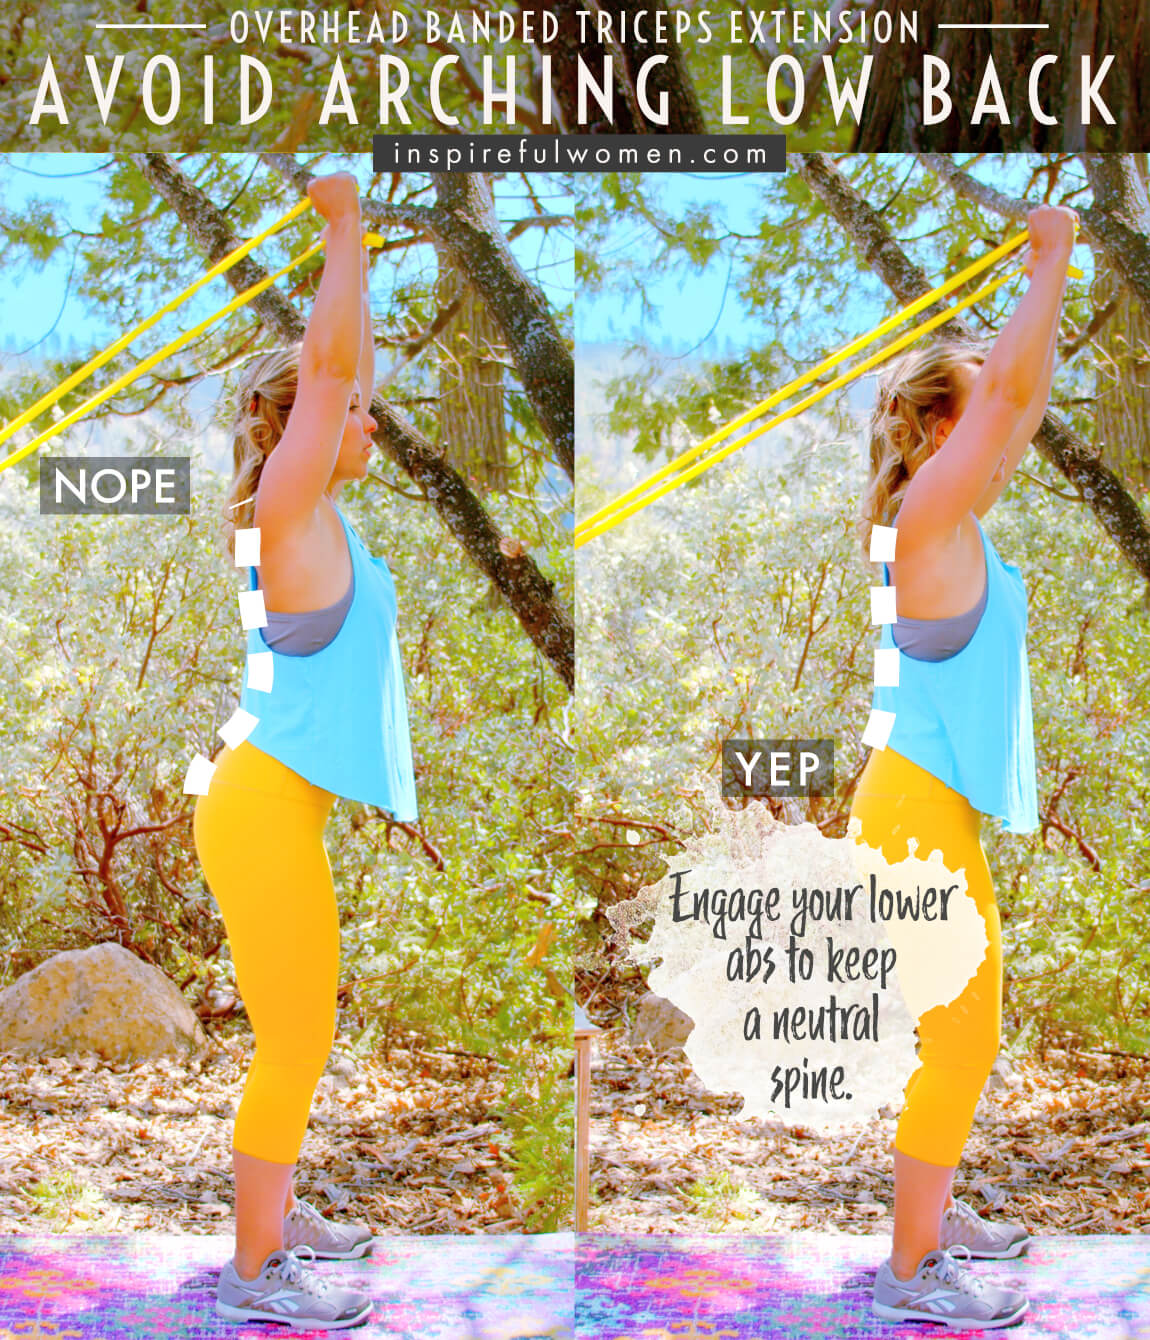 avoid-arching-low-back-overhead-banded-triceps-extension-arm-exercise-proper-form